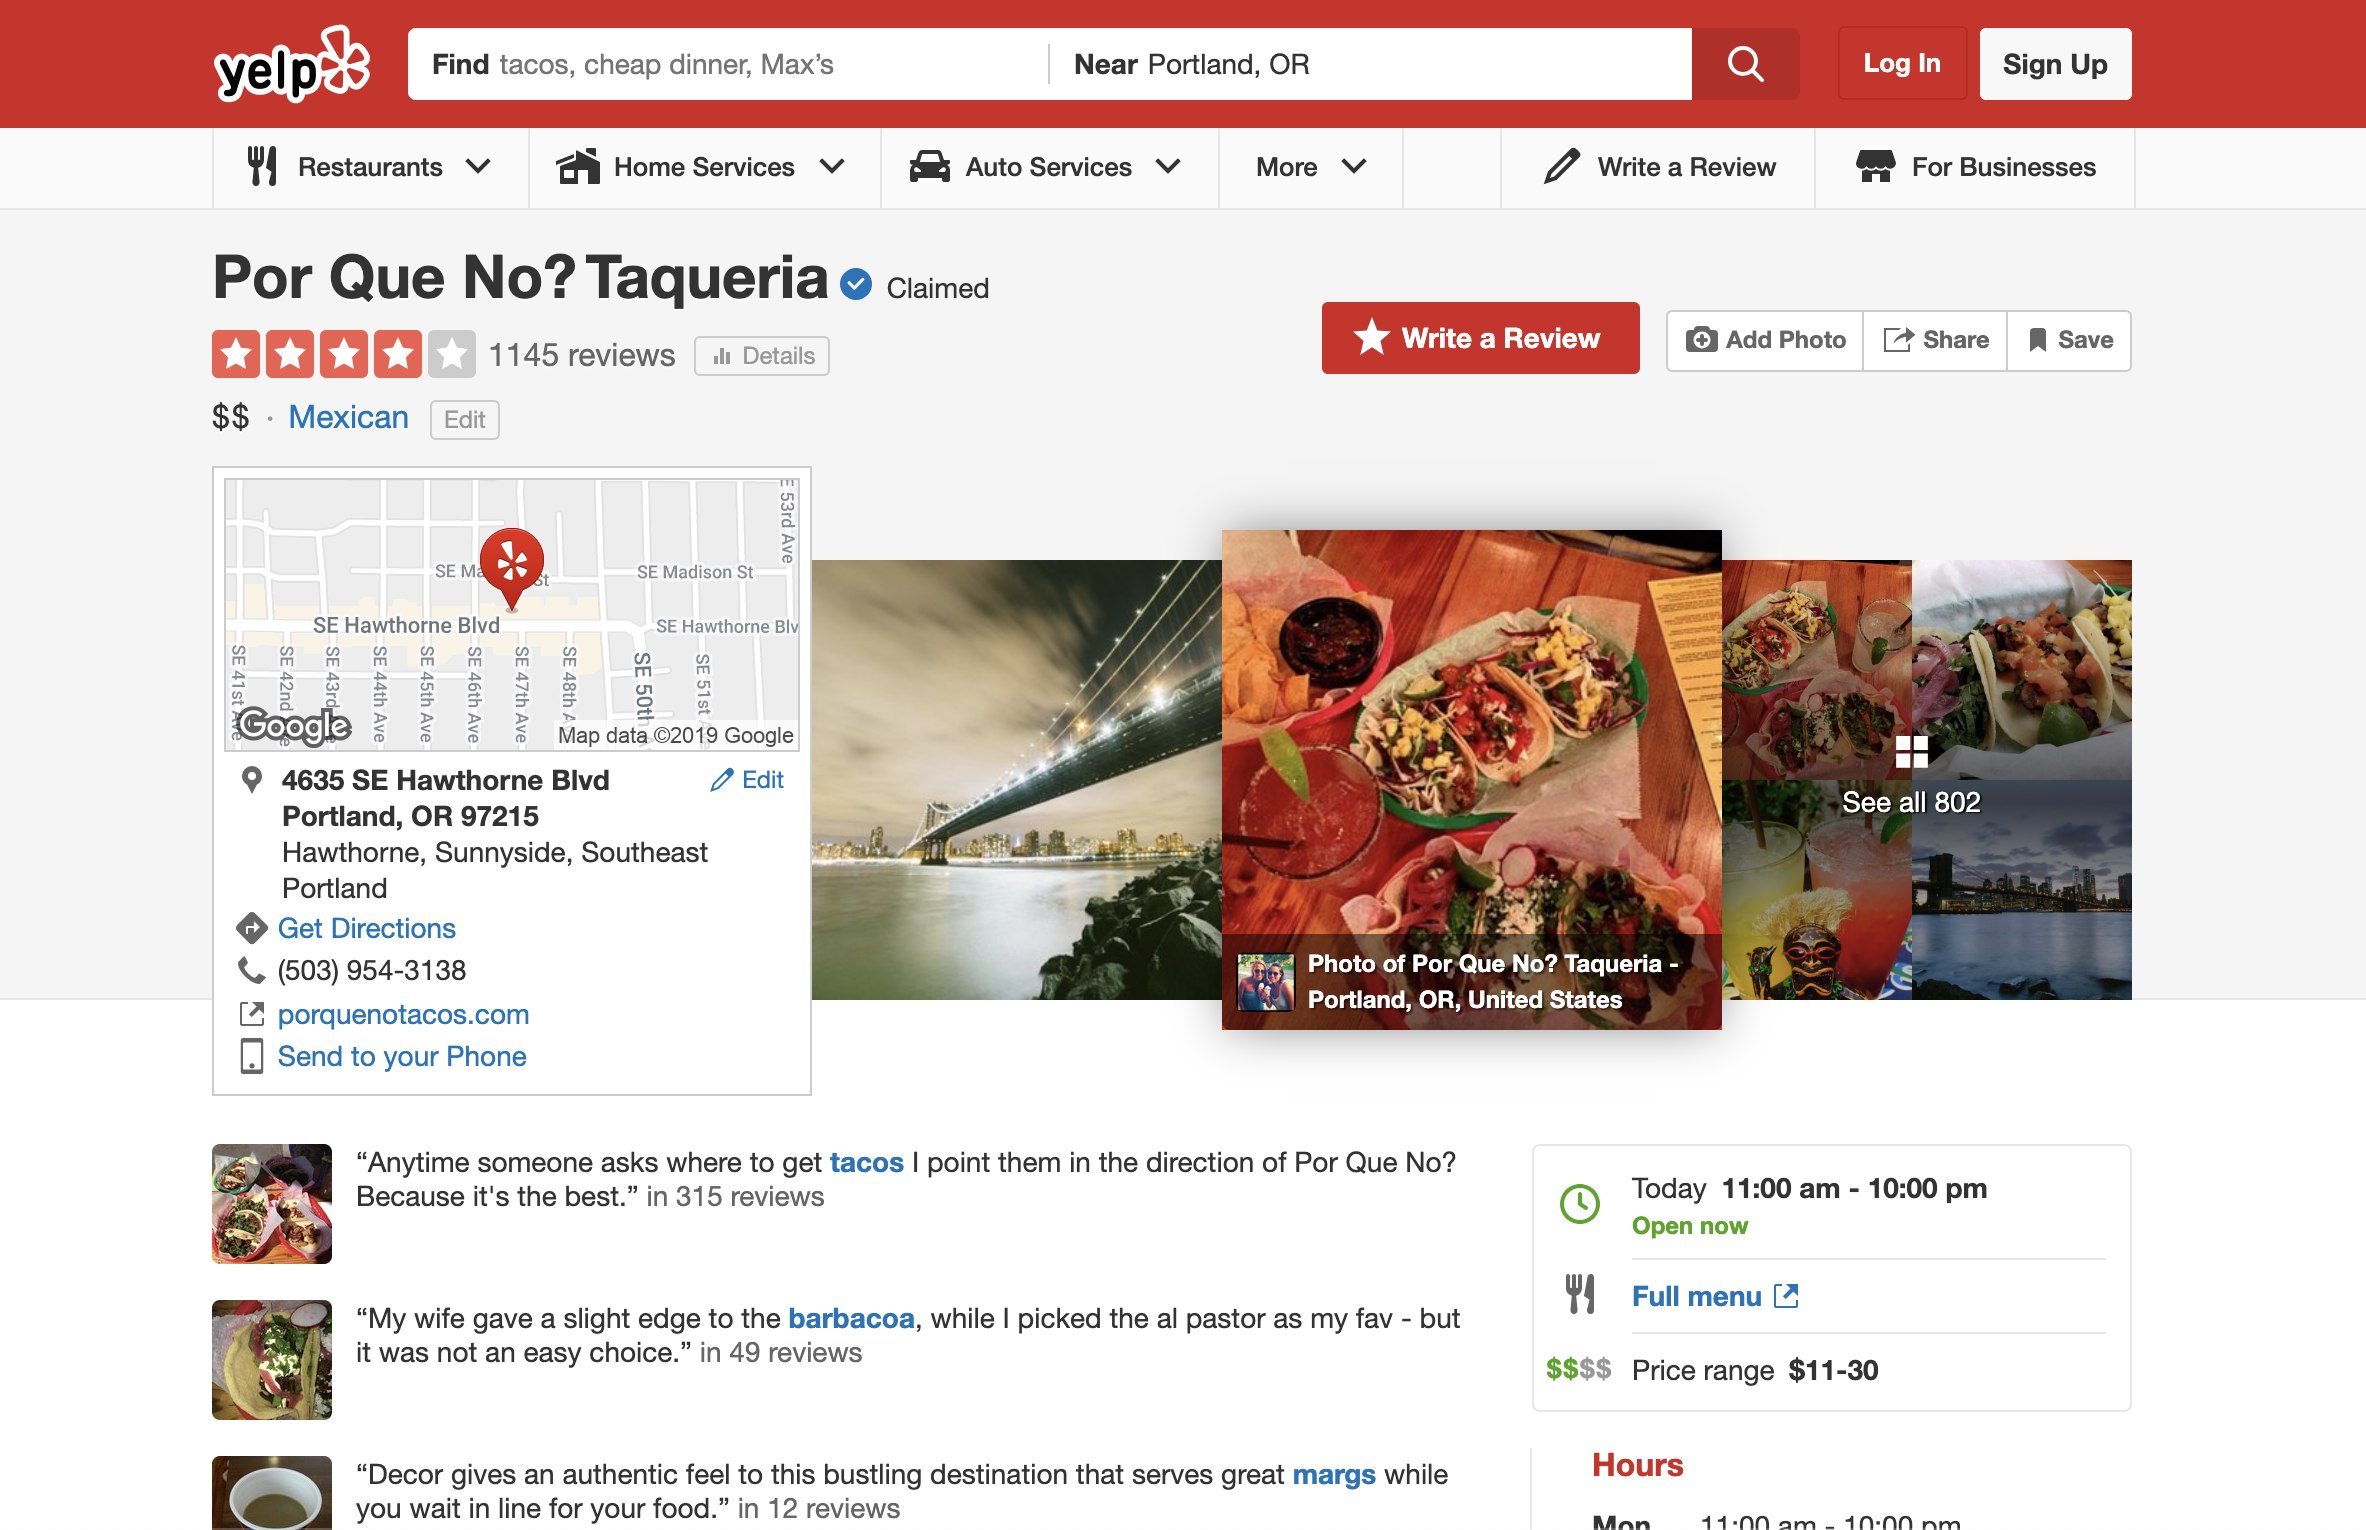 Screenshot of Yelp page showing reviews for Por Que No?, a taqueria in Portland, Oregon. The website shows the restaurant's location, their average rating (4 stars over 1145 reviews), their price range (two on a scale of five), a series of customer photos of food taken at the restaurant, the restaurant's operating hours, a link to their full menu, and several highlights of customer reviews. The page also provides several buttons for a user to take the following actions: write a review, add a photo, share the webpage, and save the webpage.